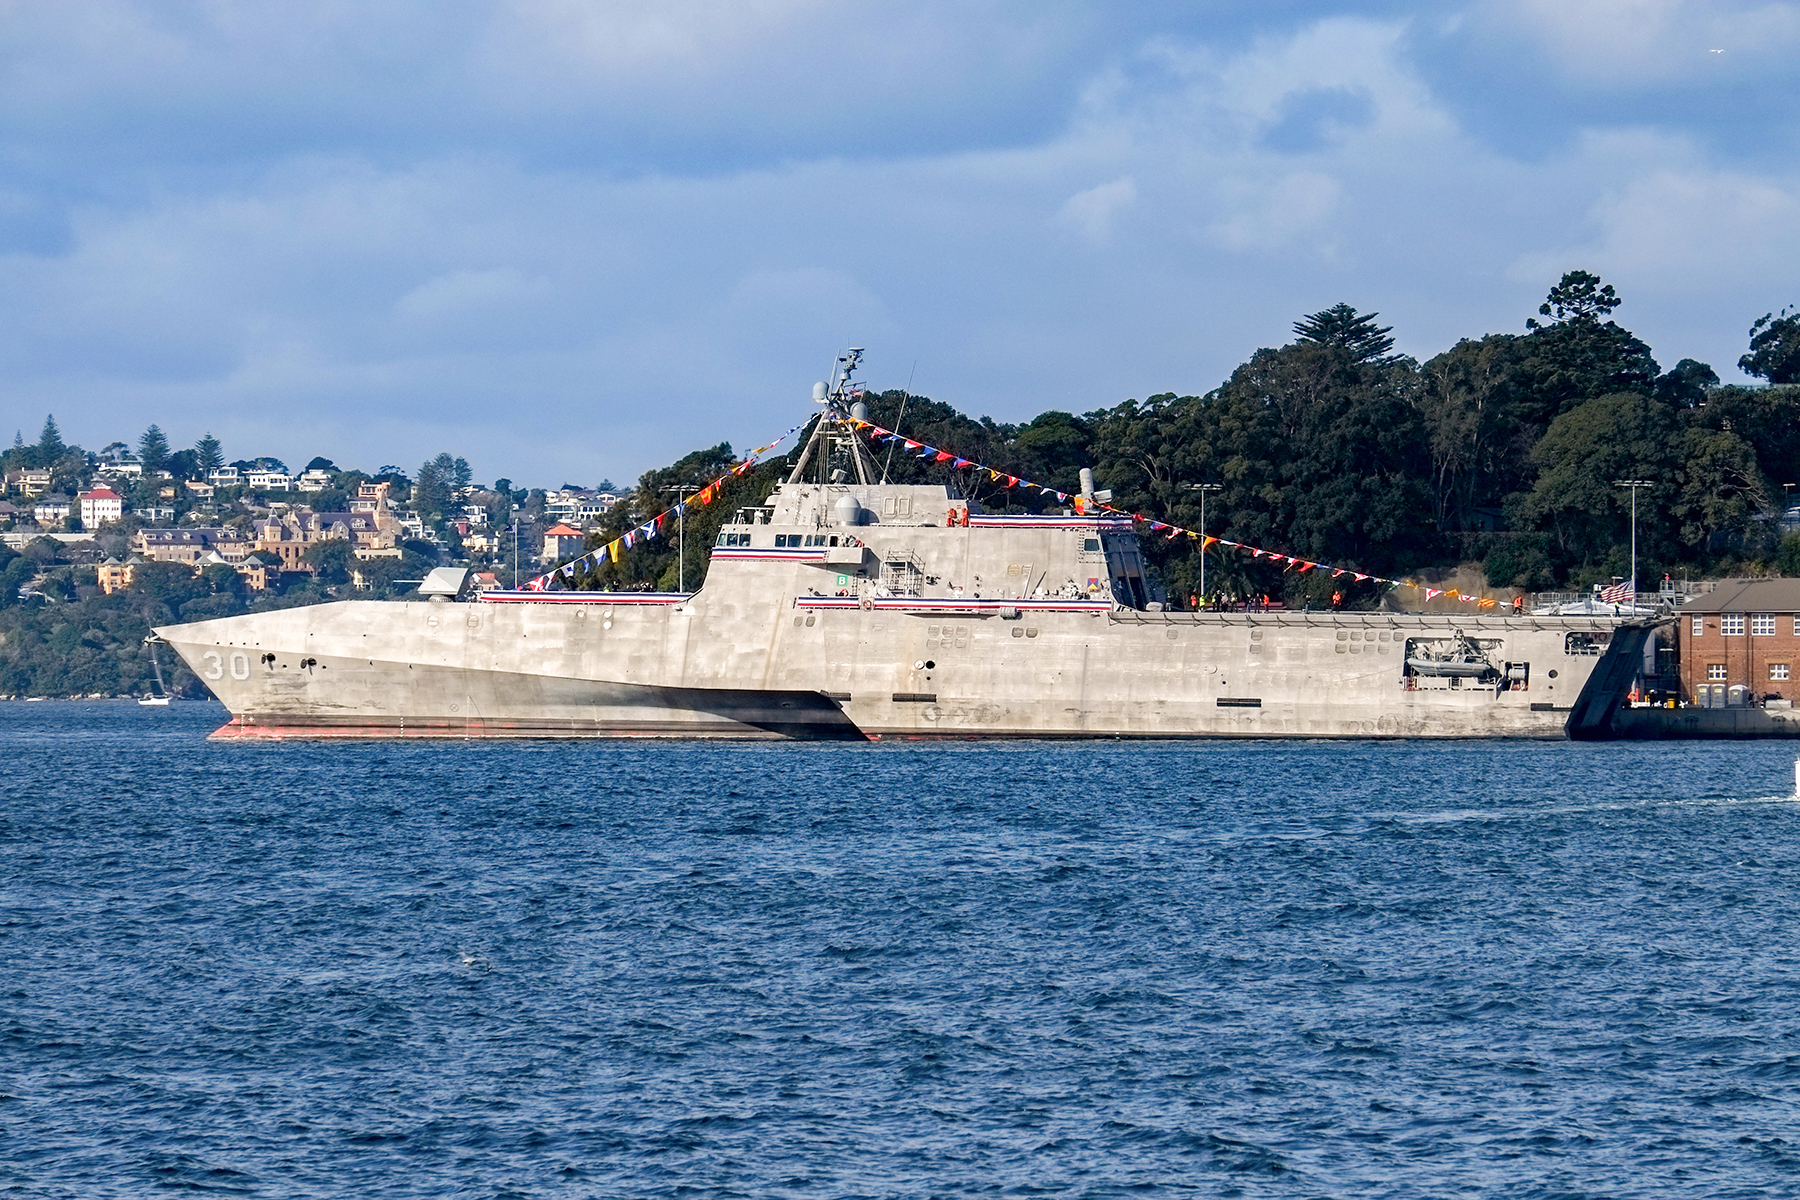 The USS Canberra arriving in Sydney Harbor. [Image: Windmemories via Wikimedia Commons]